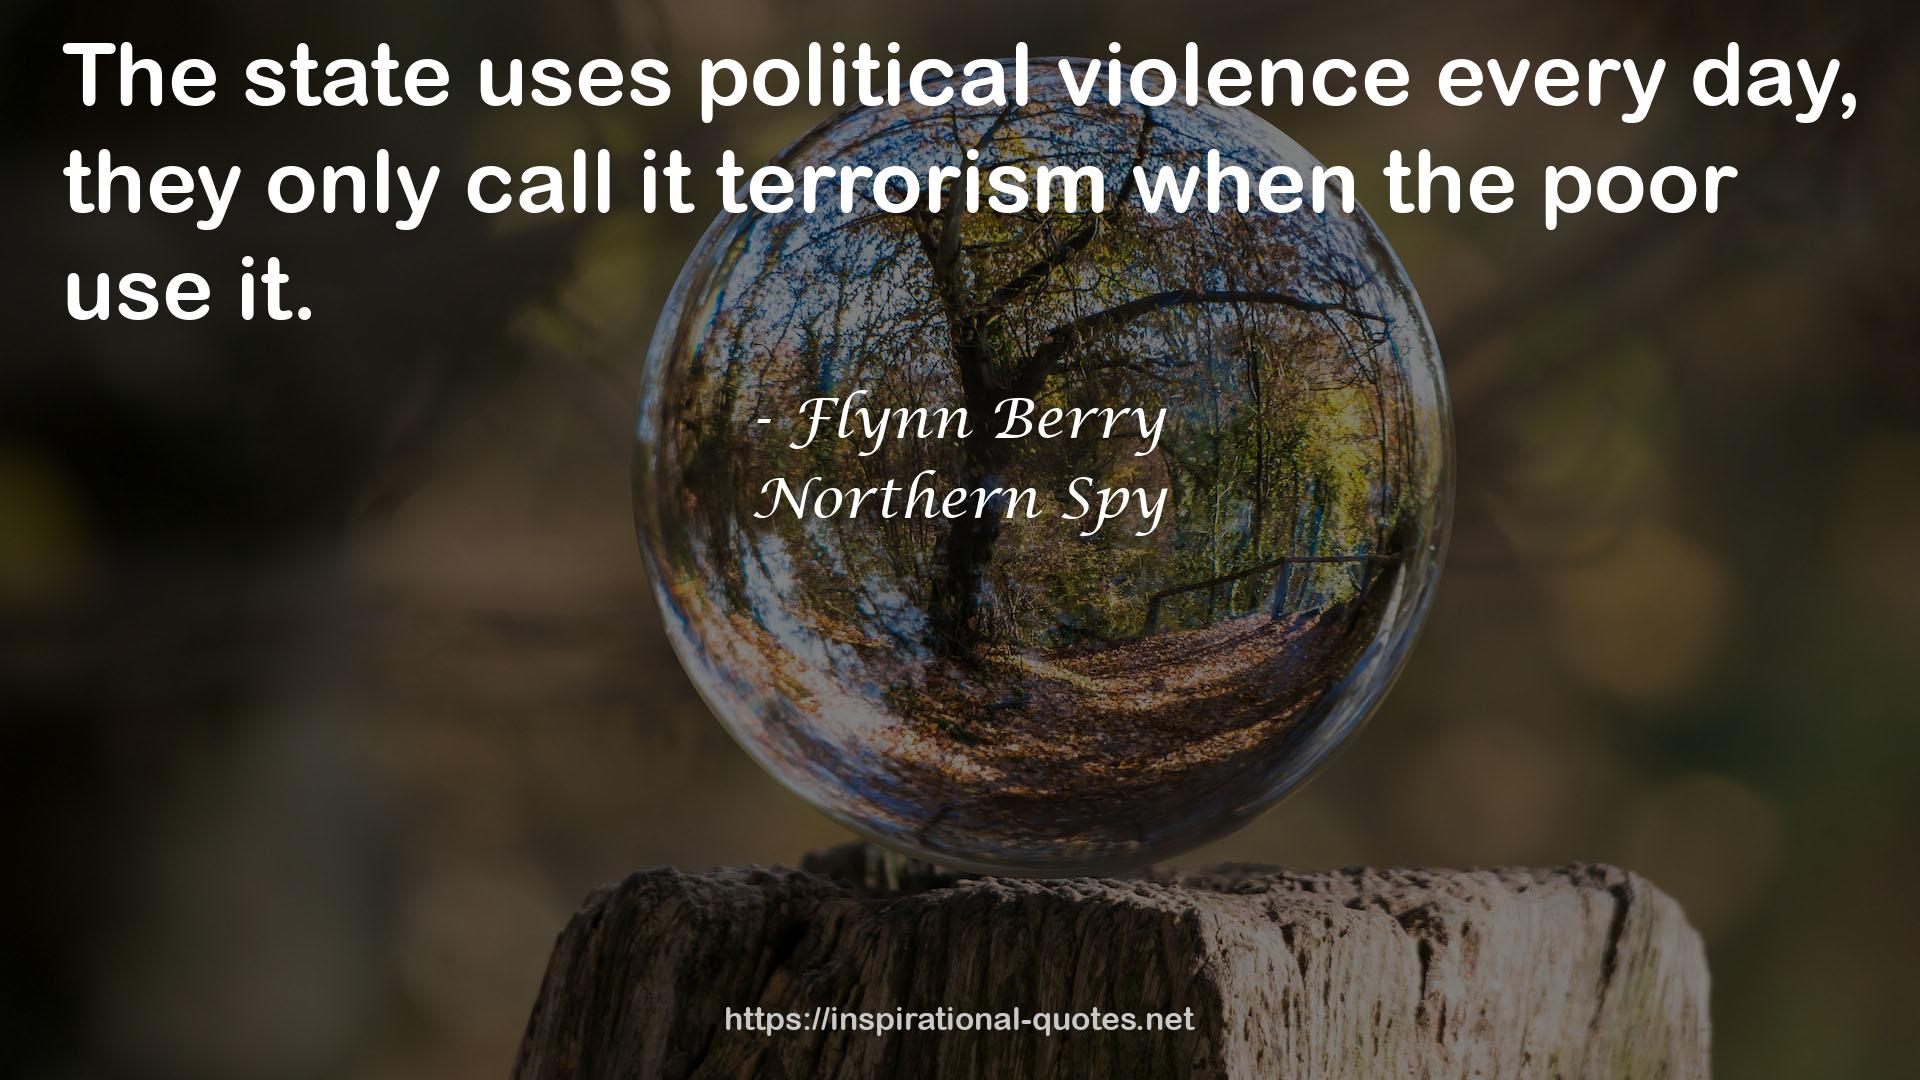 Northern Spy QUOTES